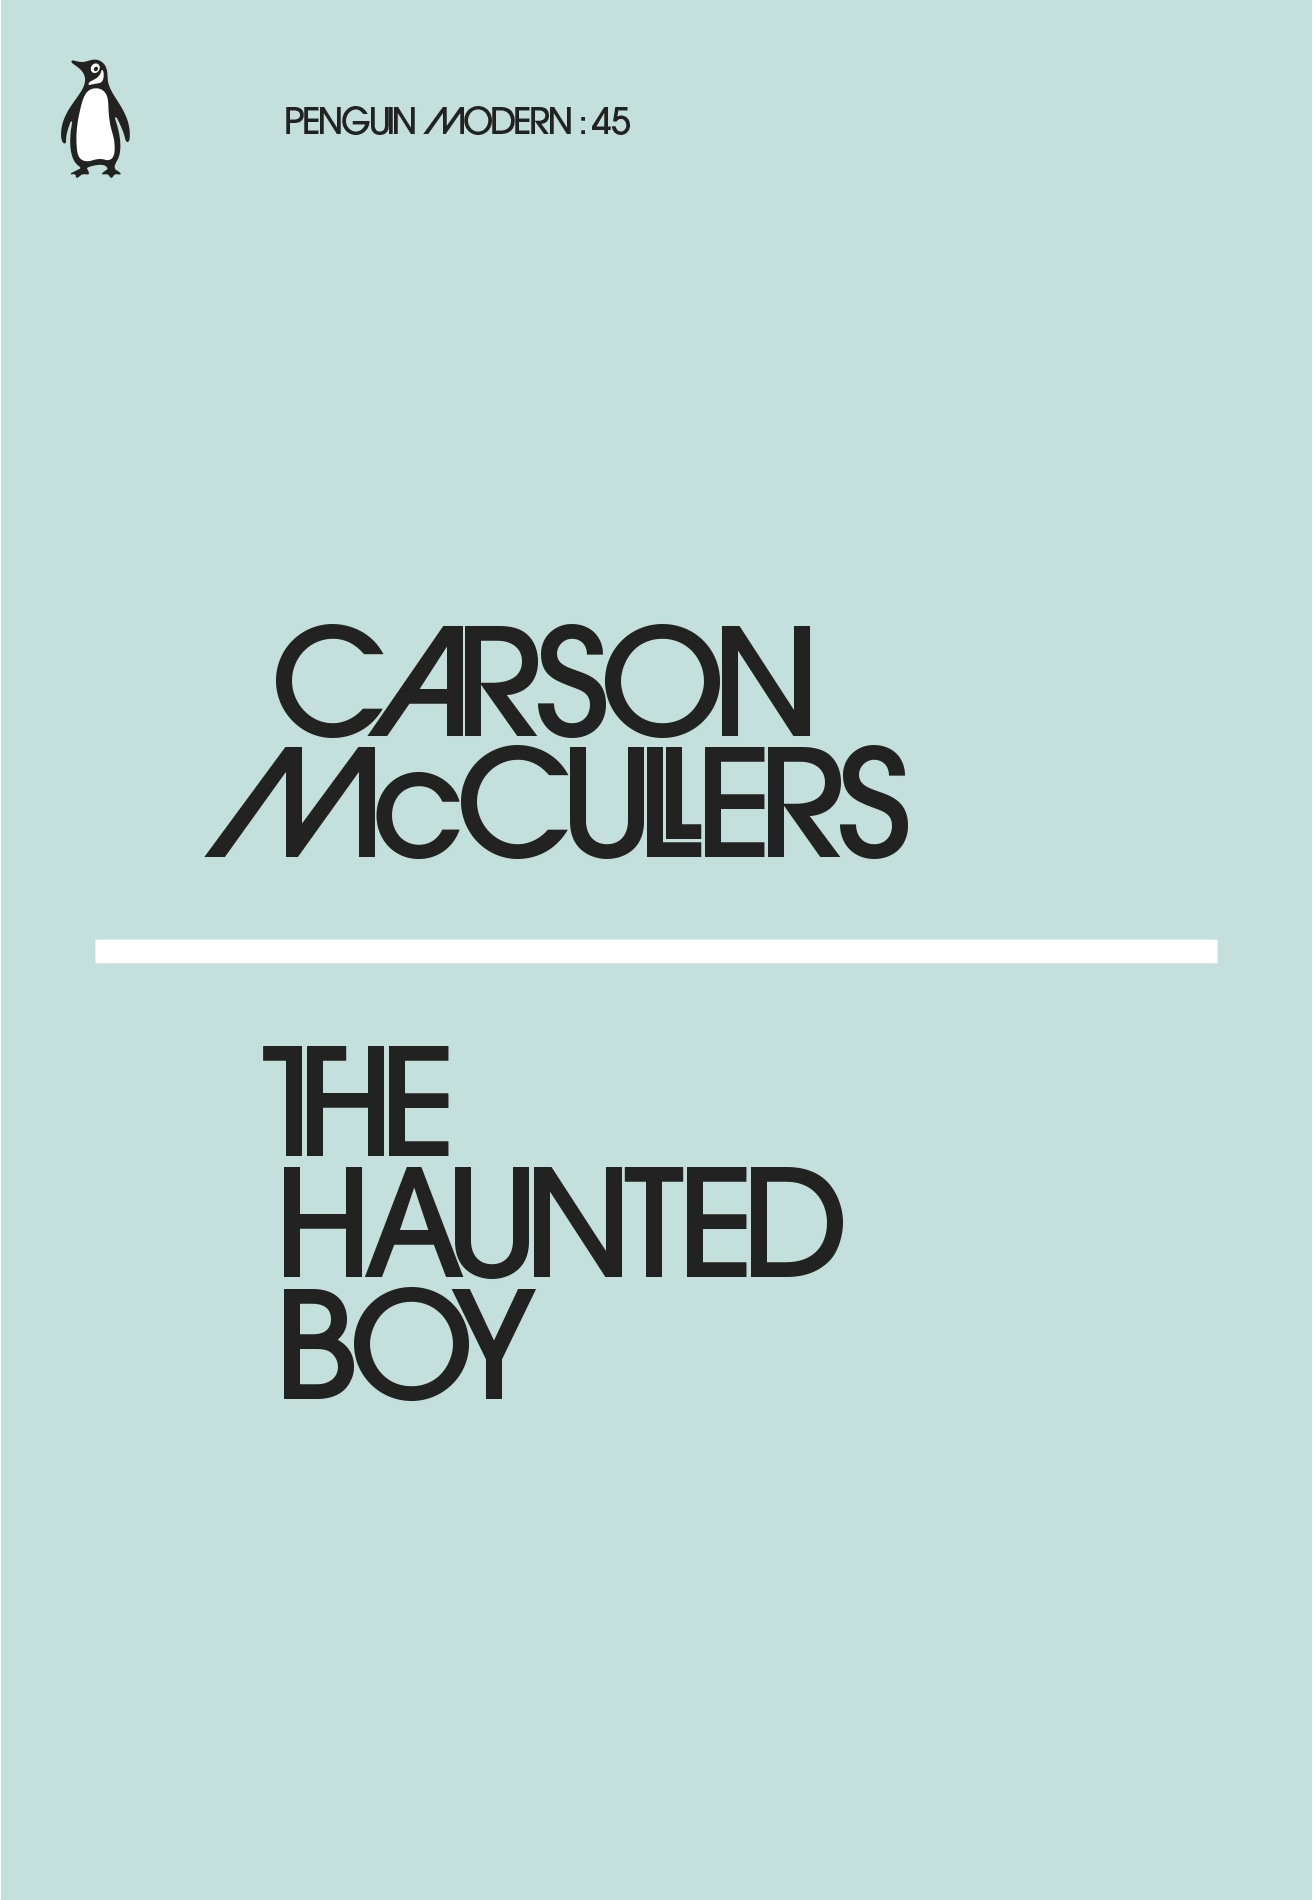 Book “The Haunted Boy” by Carson McCullers — February 22, 2018